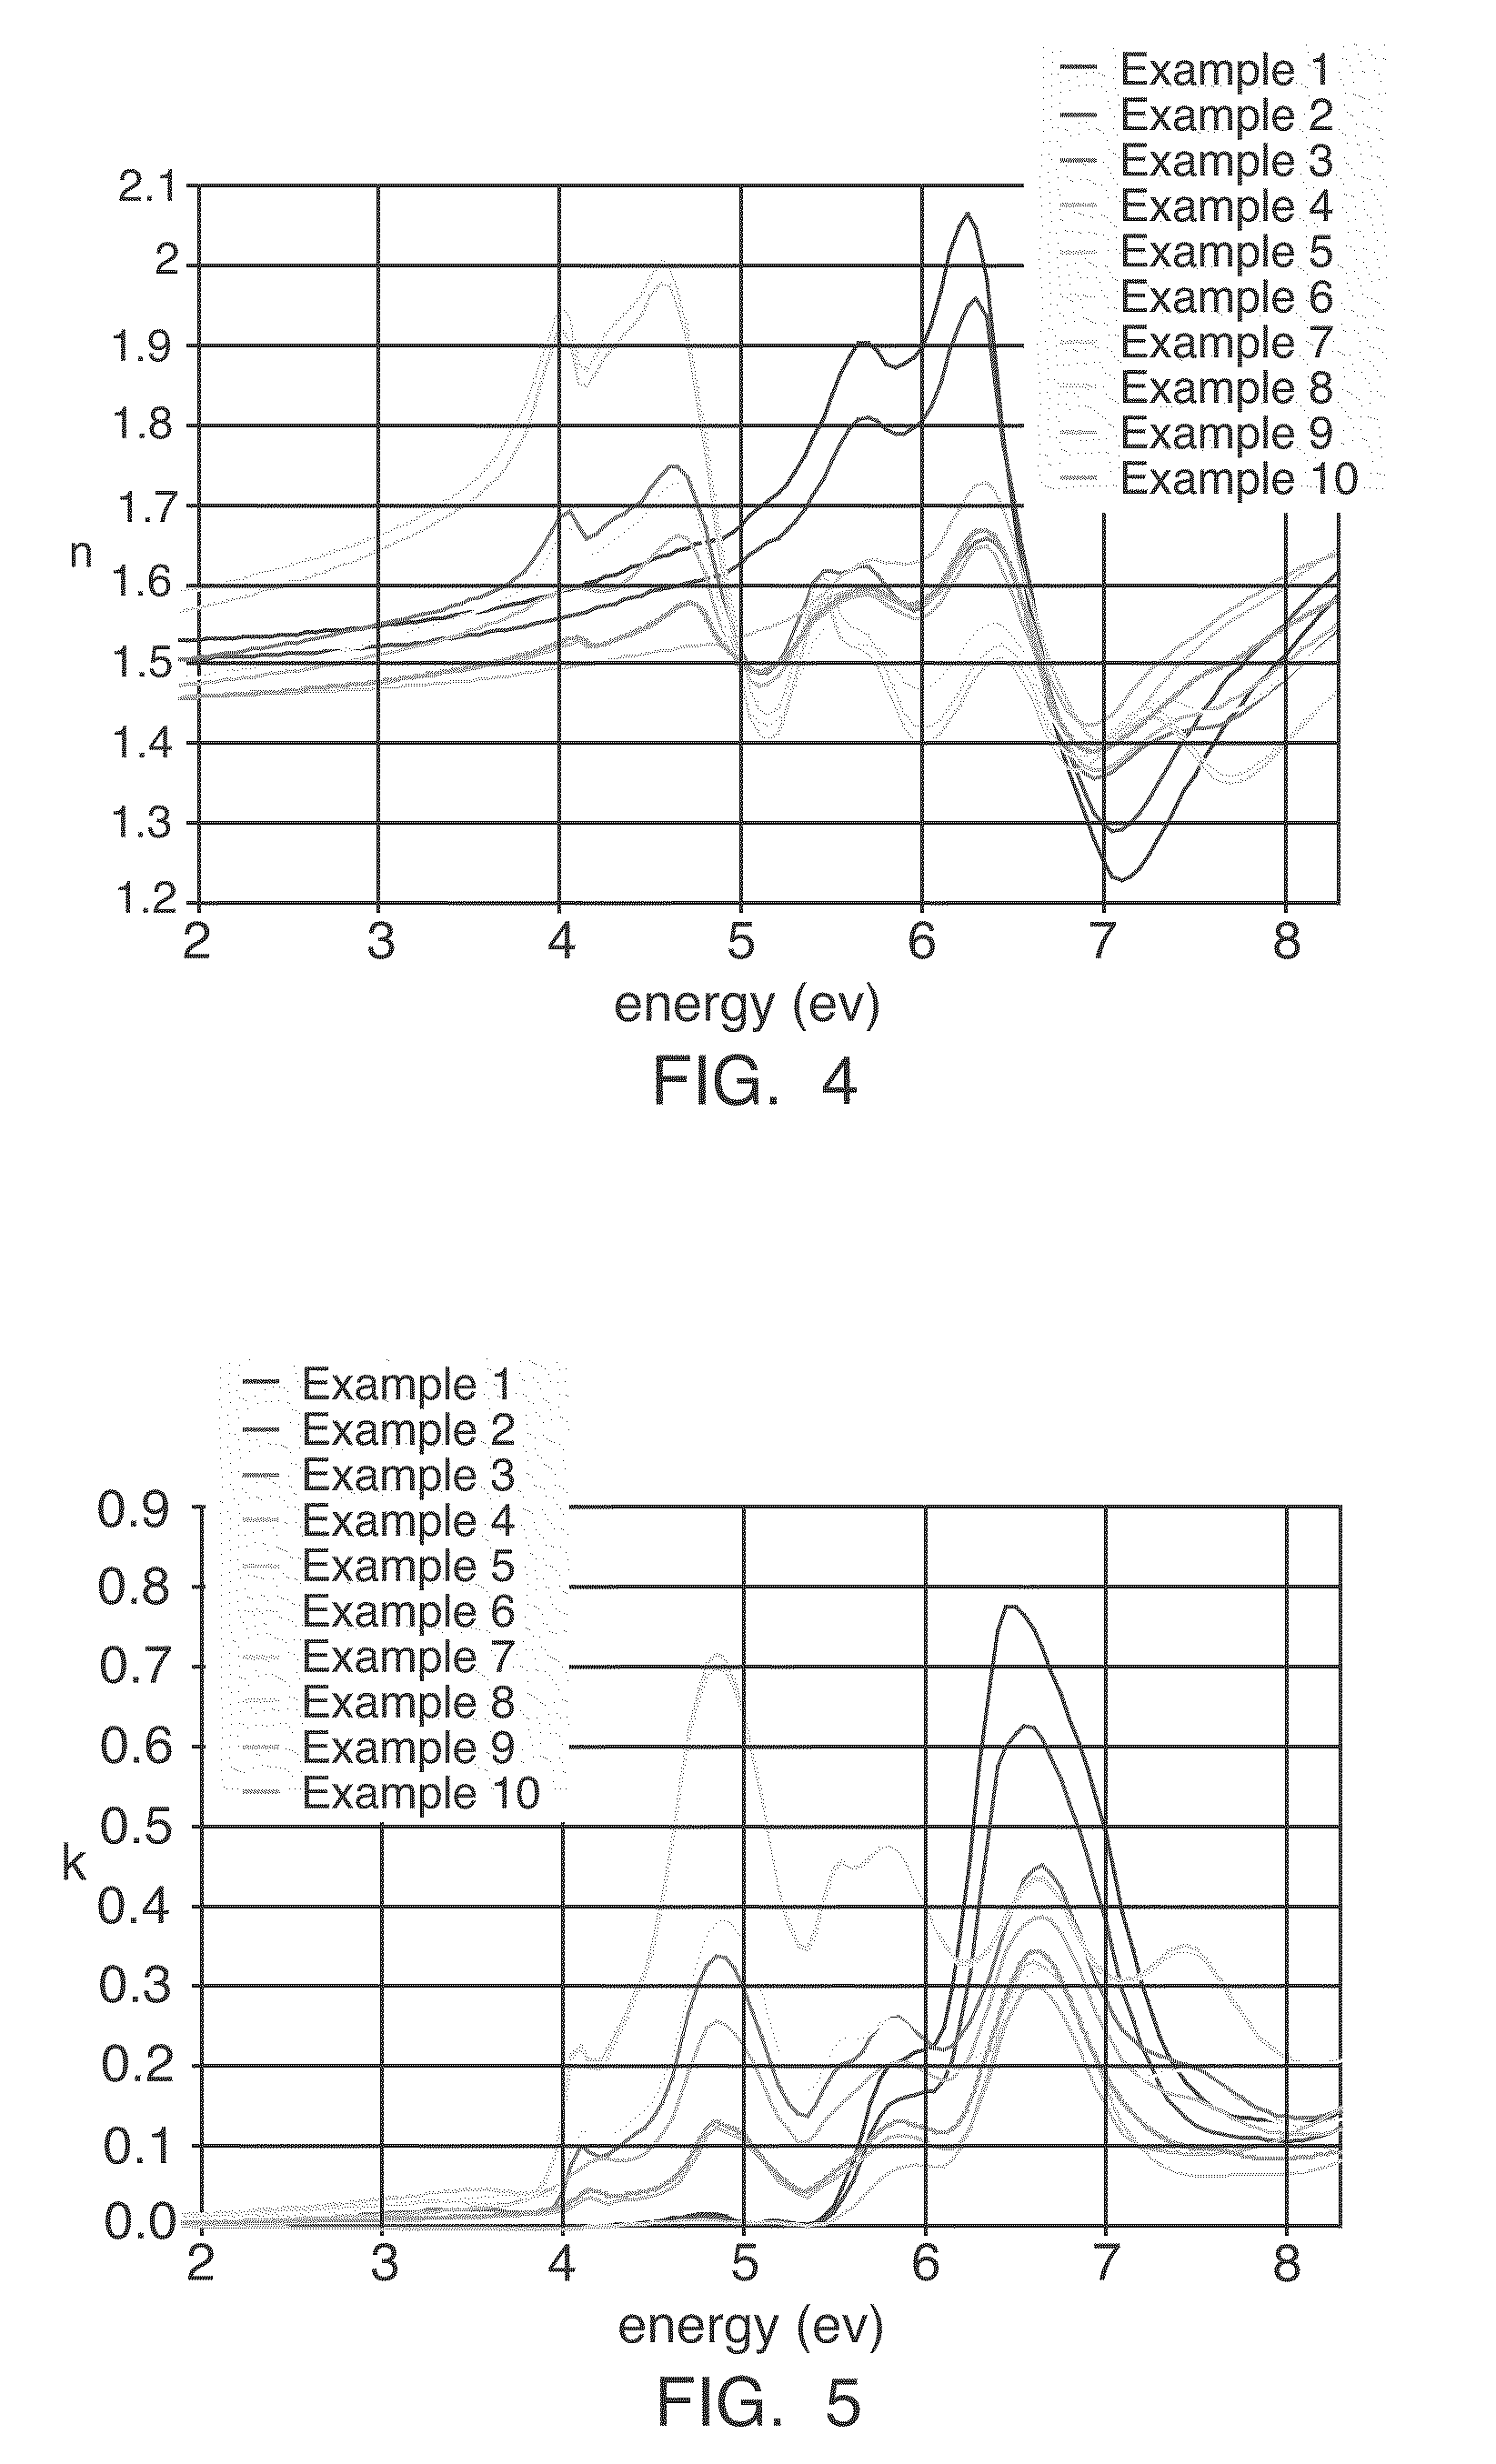 Carbosilane polymer compositions for Anti-reflective coatings